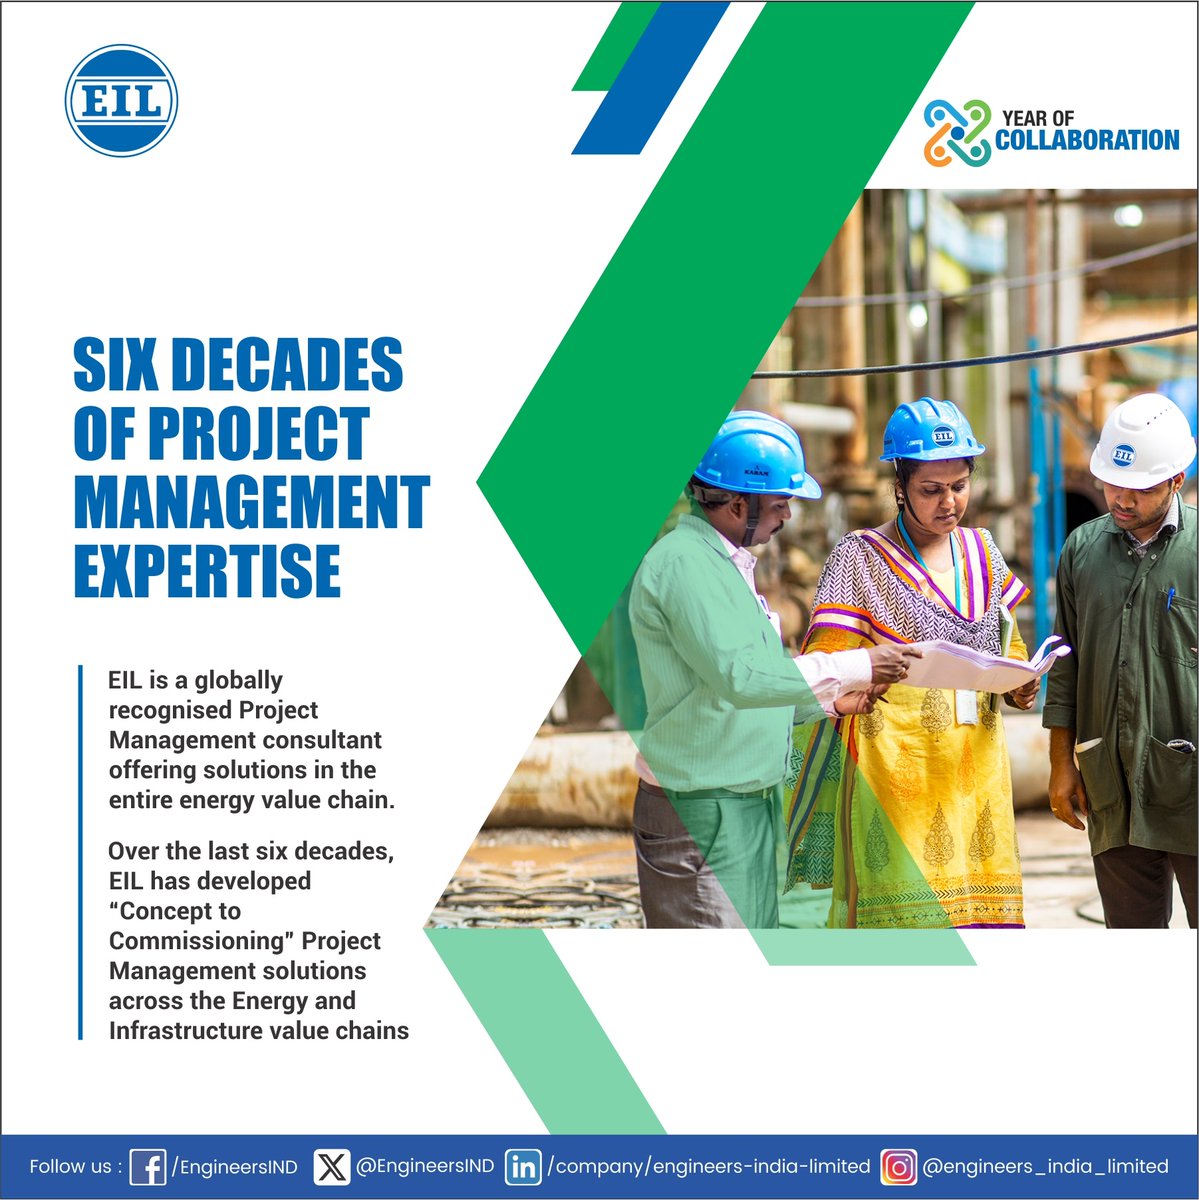 EIL is a ‘Total Solutions’ engineering consultancy company providing design, engineering, procurement, construction and integrated project management services from ‘Concept to Commissioning’ with the highest quality and safety standards. Over the last six decades, EIL has been at